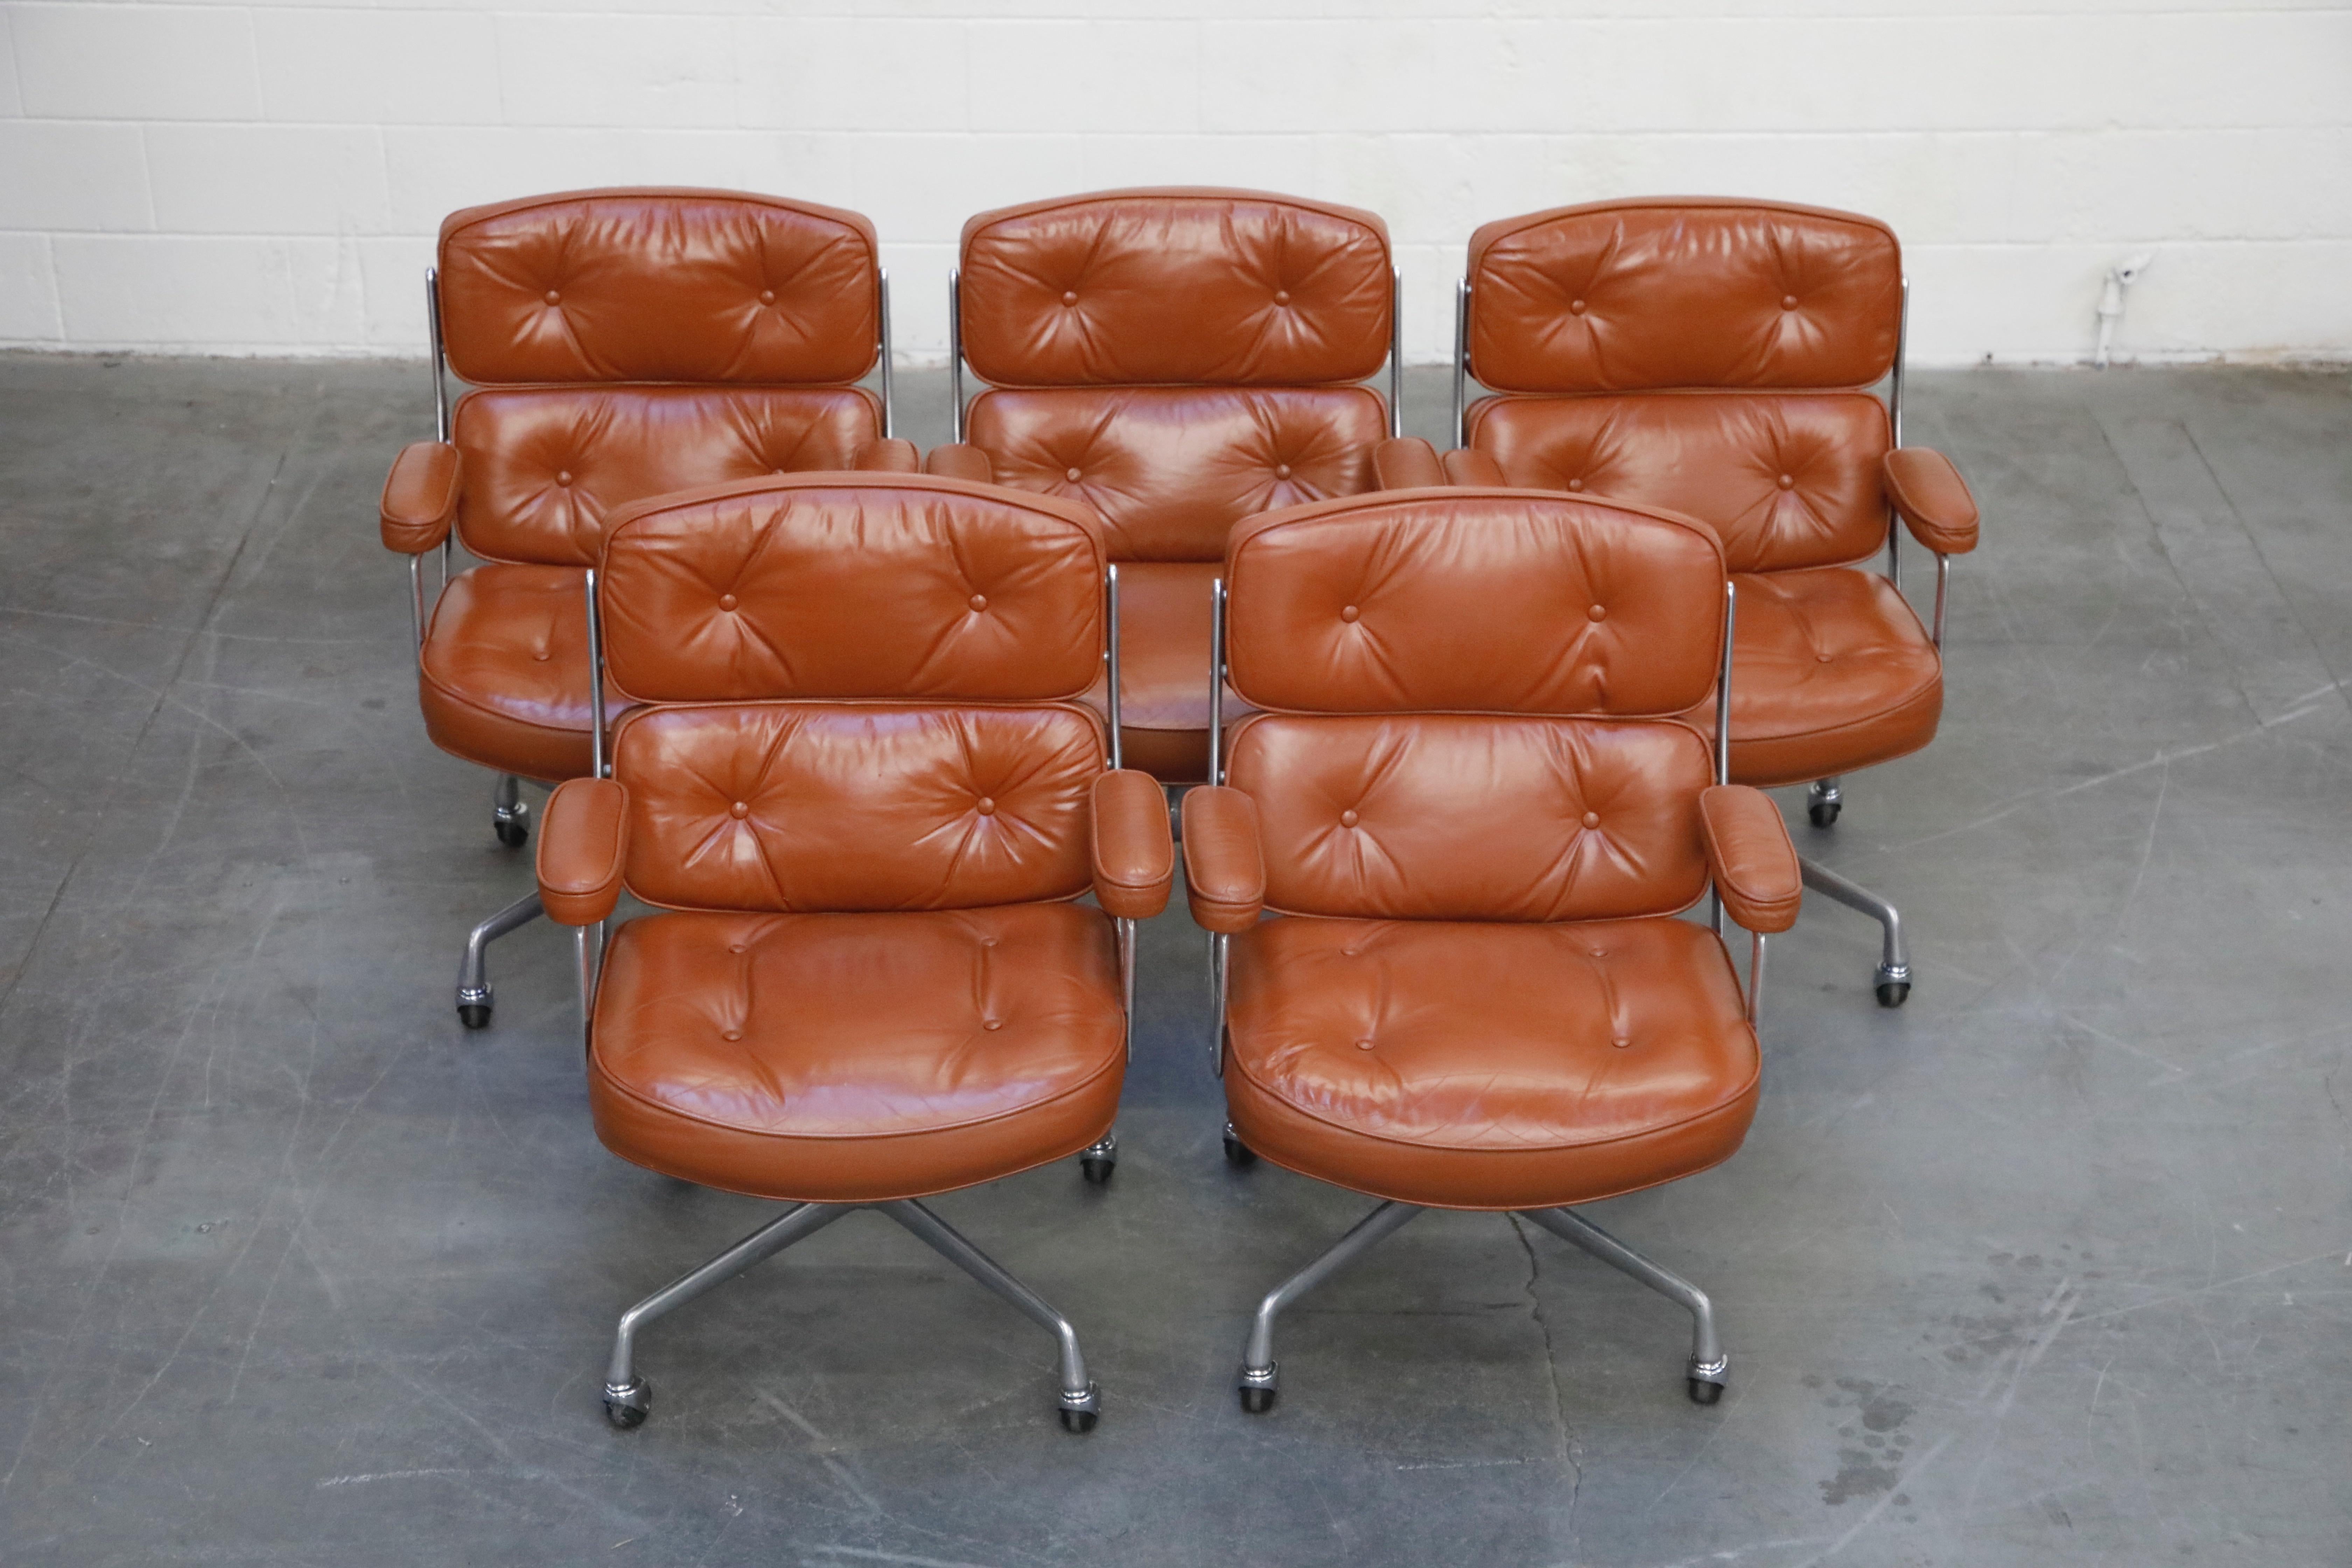 Late 20th Century 'Time Life' Executive Chairs by Charles Eames for Herman Miller, 1983, Signed